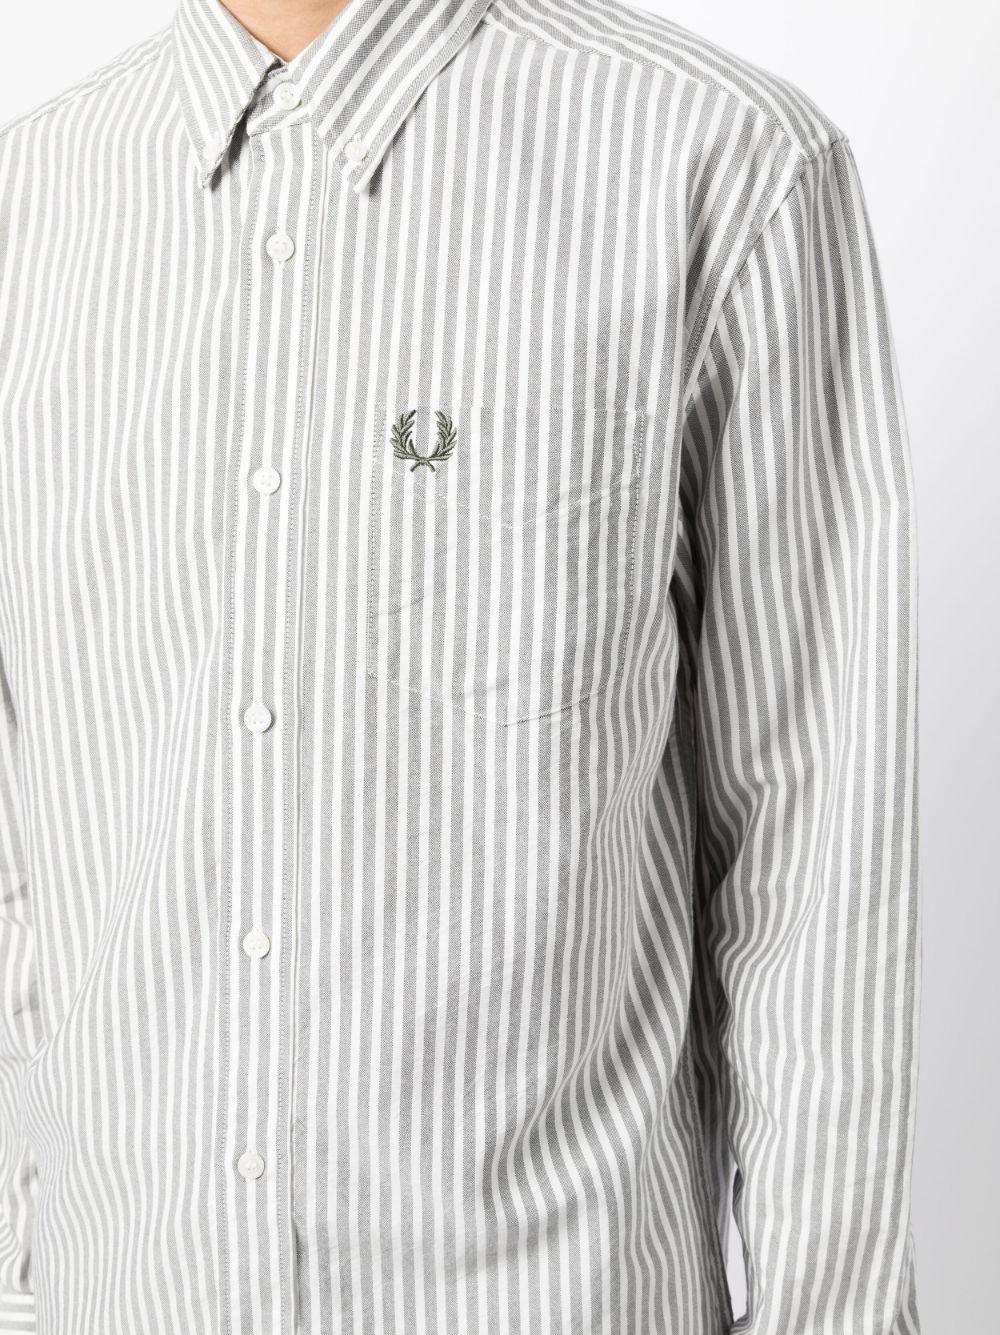 logo-embroidered striped cotton shirt - 5